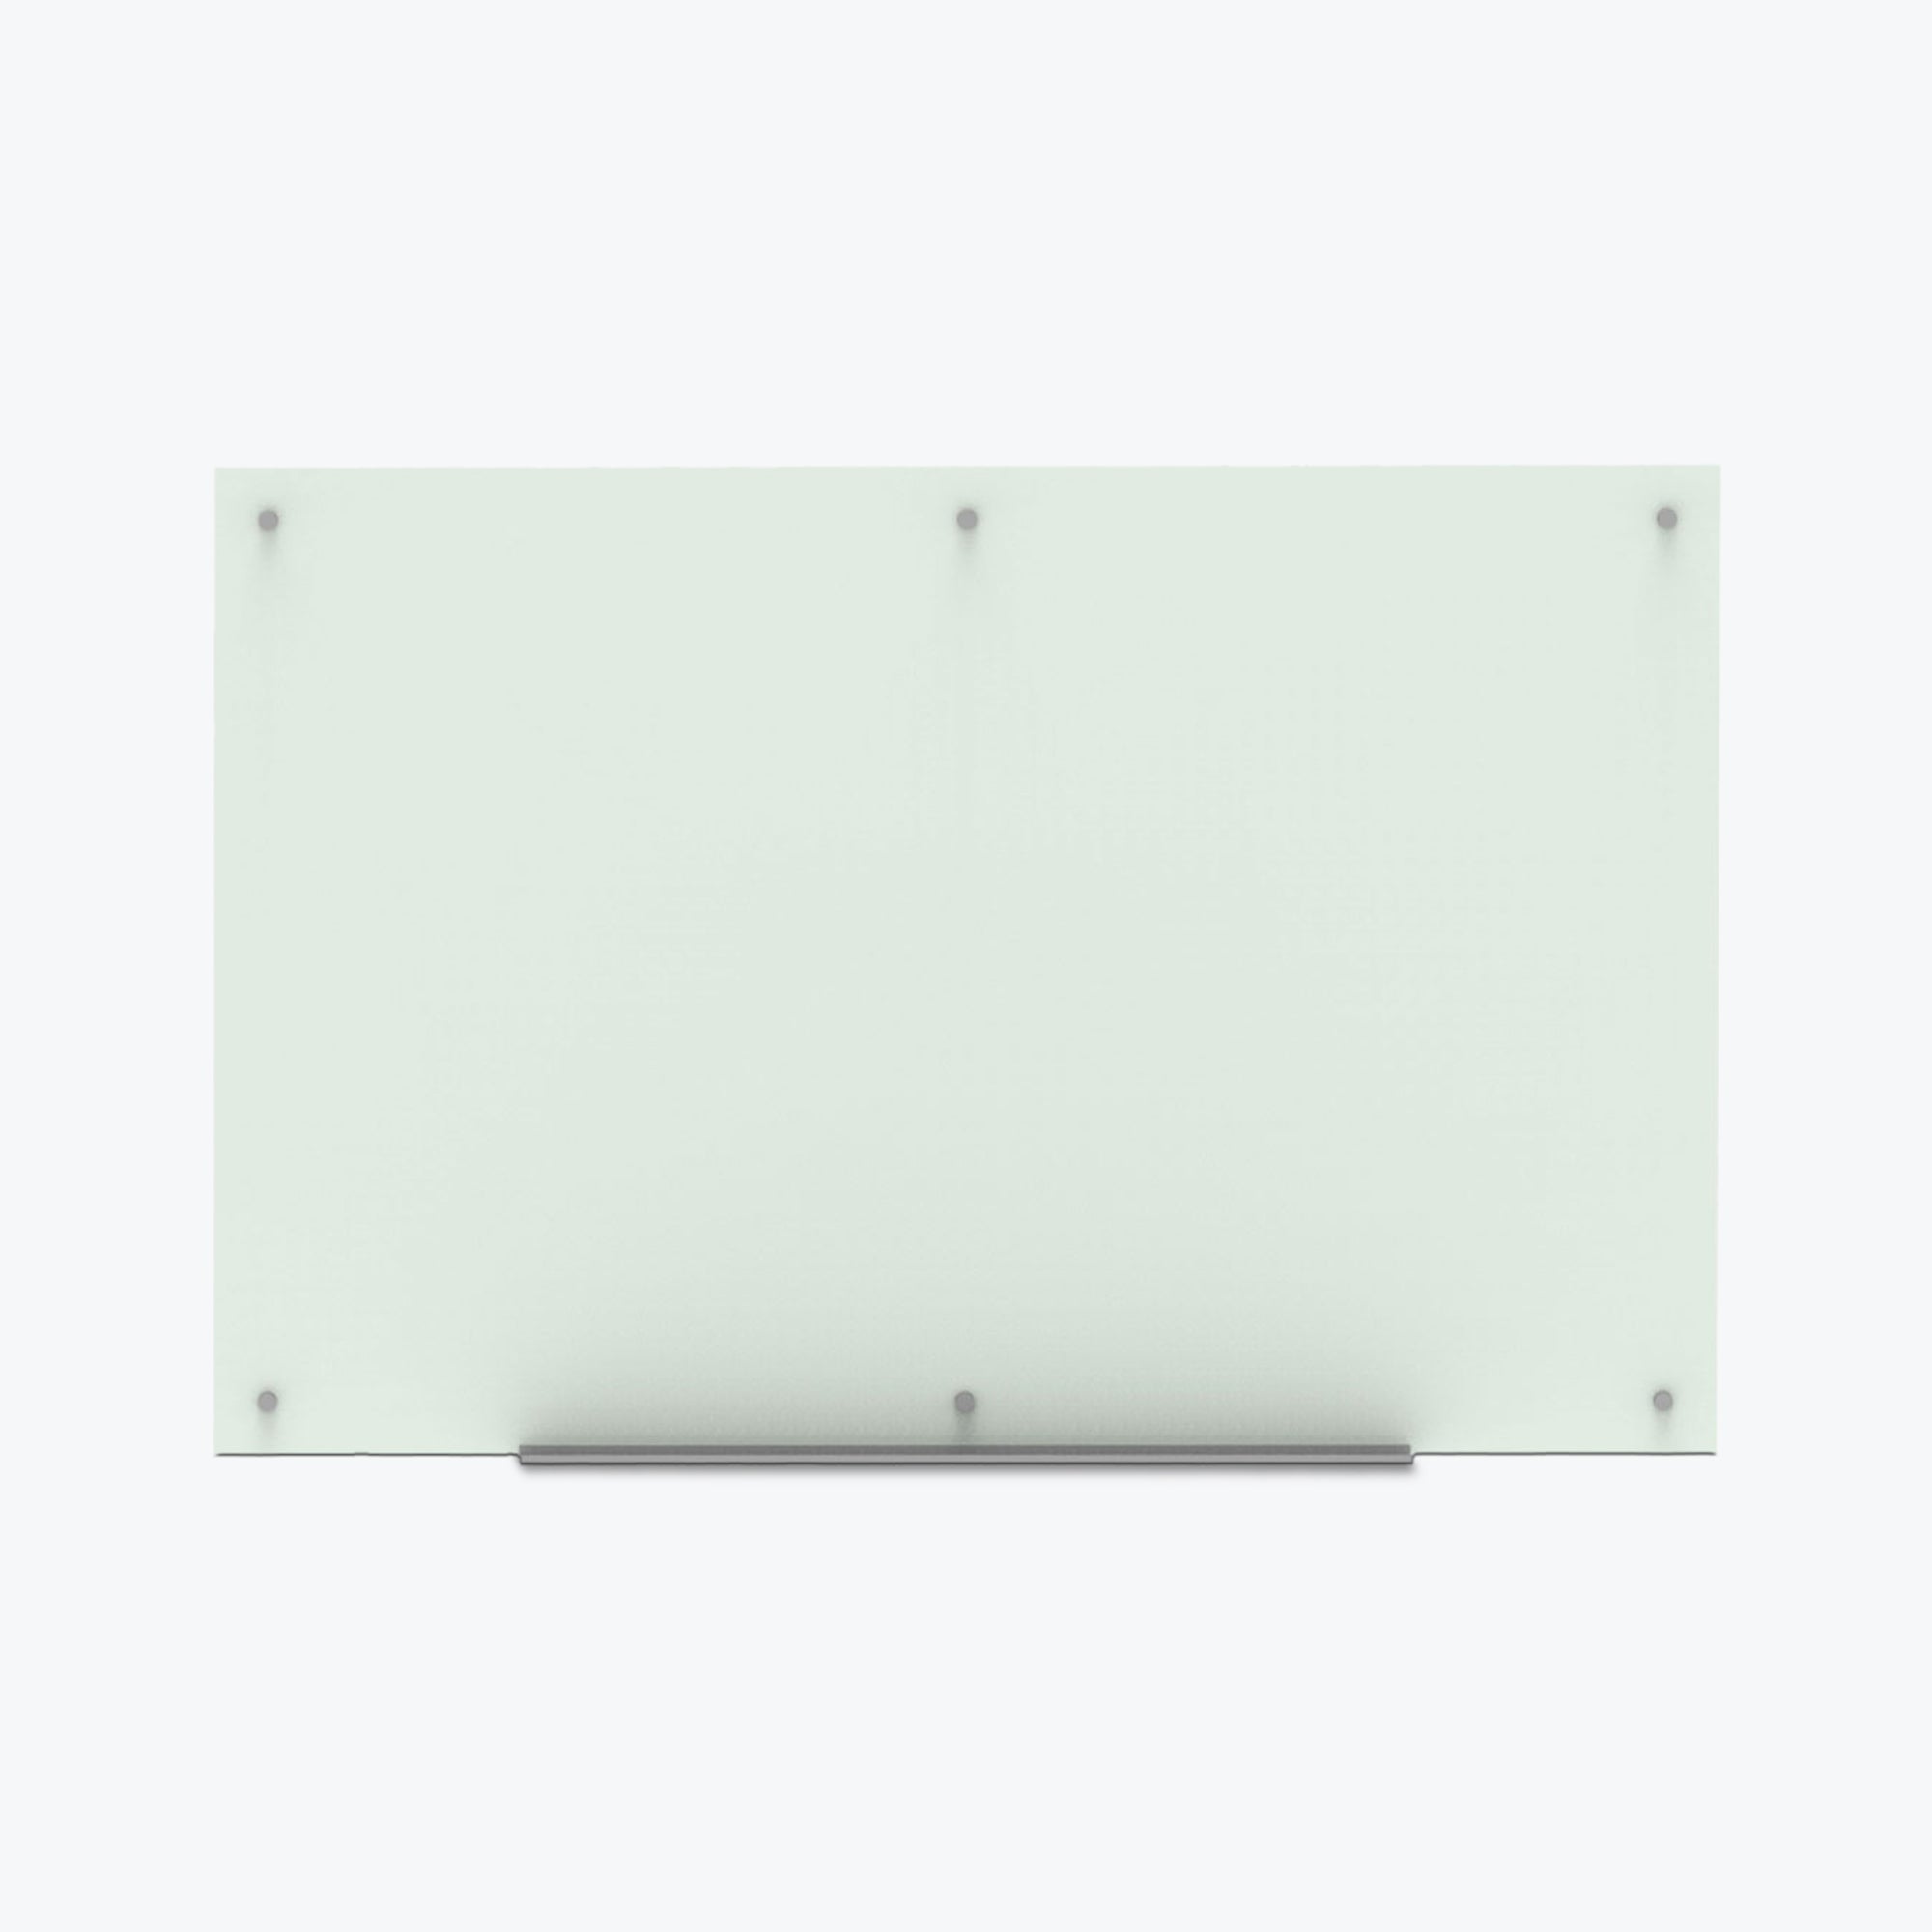 Luxor WB3624W 36 x 24 Wall-Mounted Magnetic Whiteboard